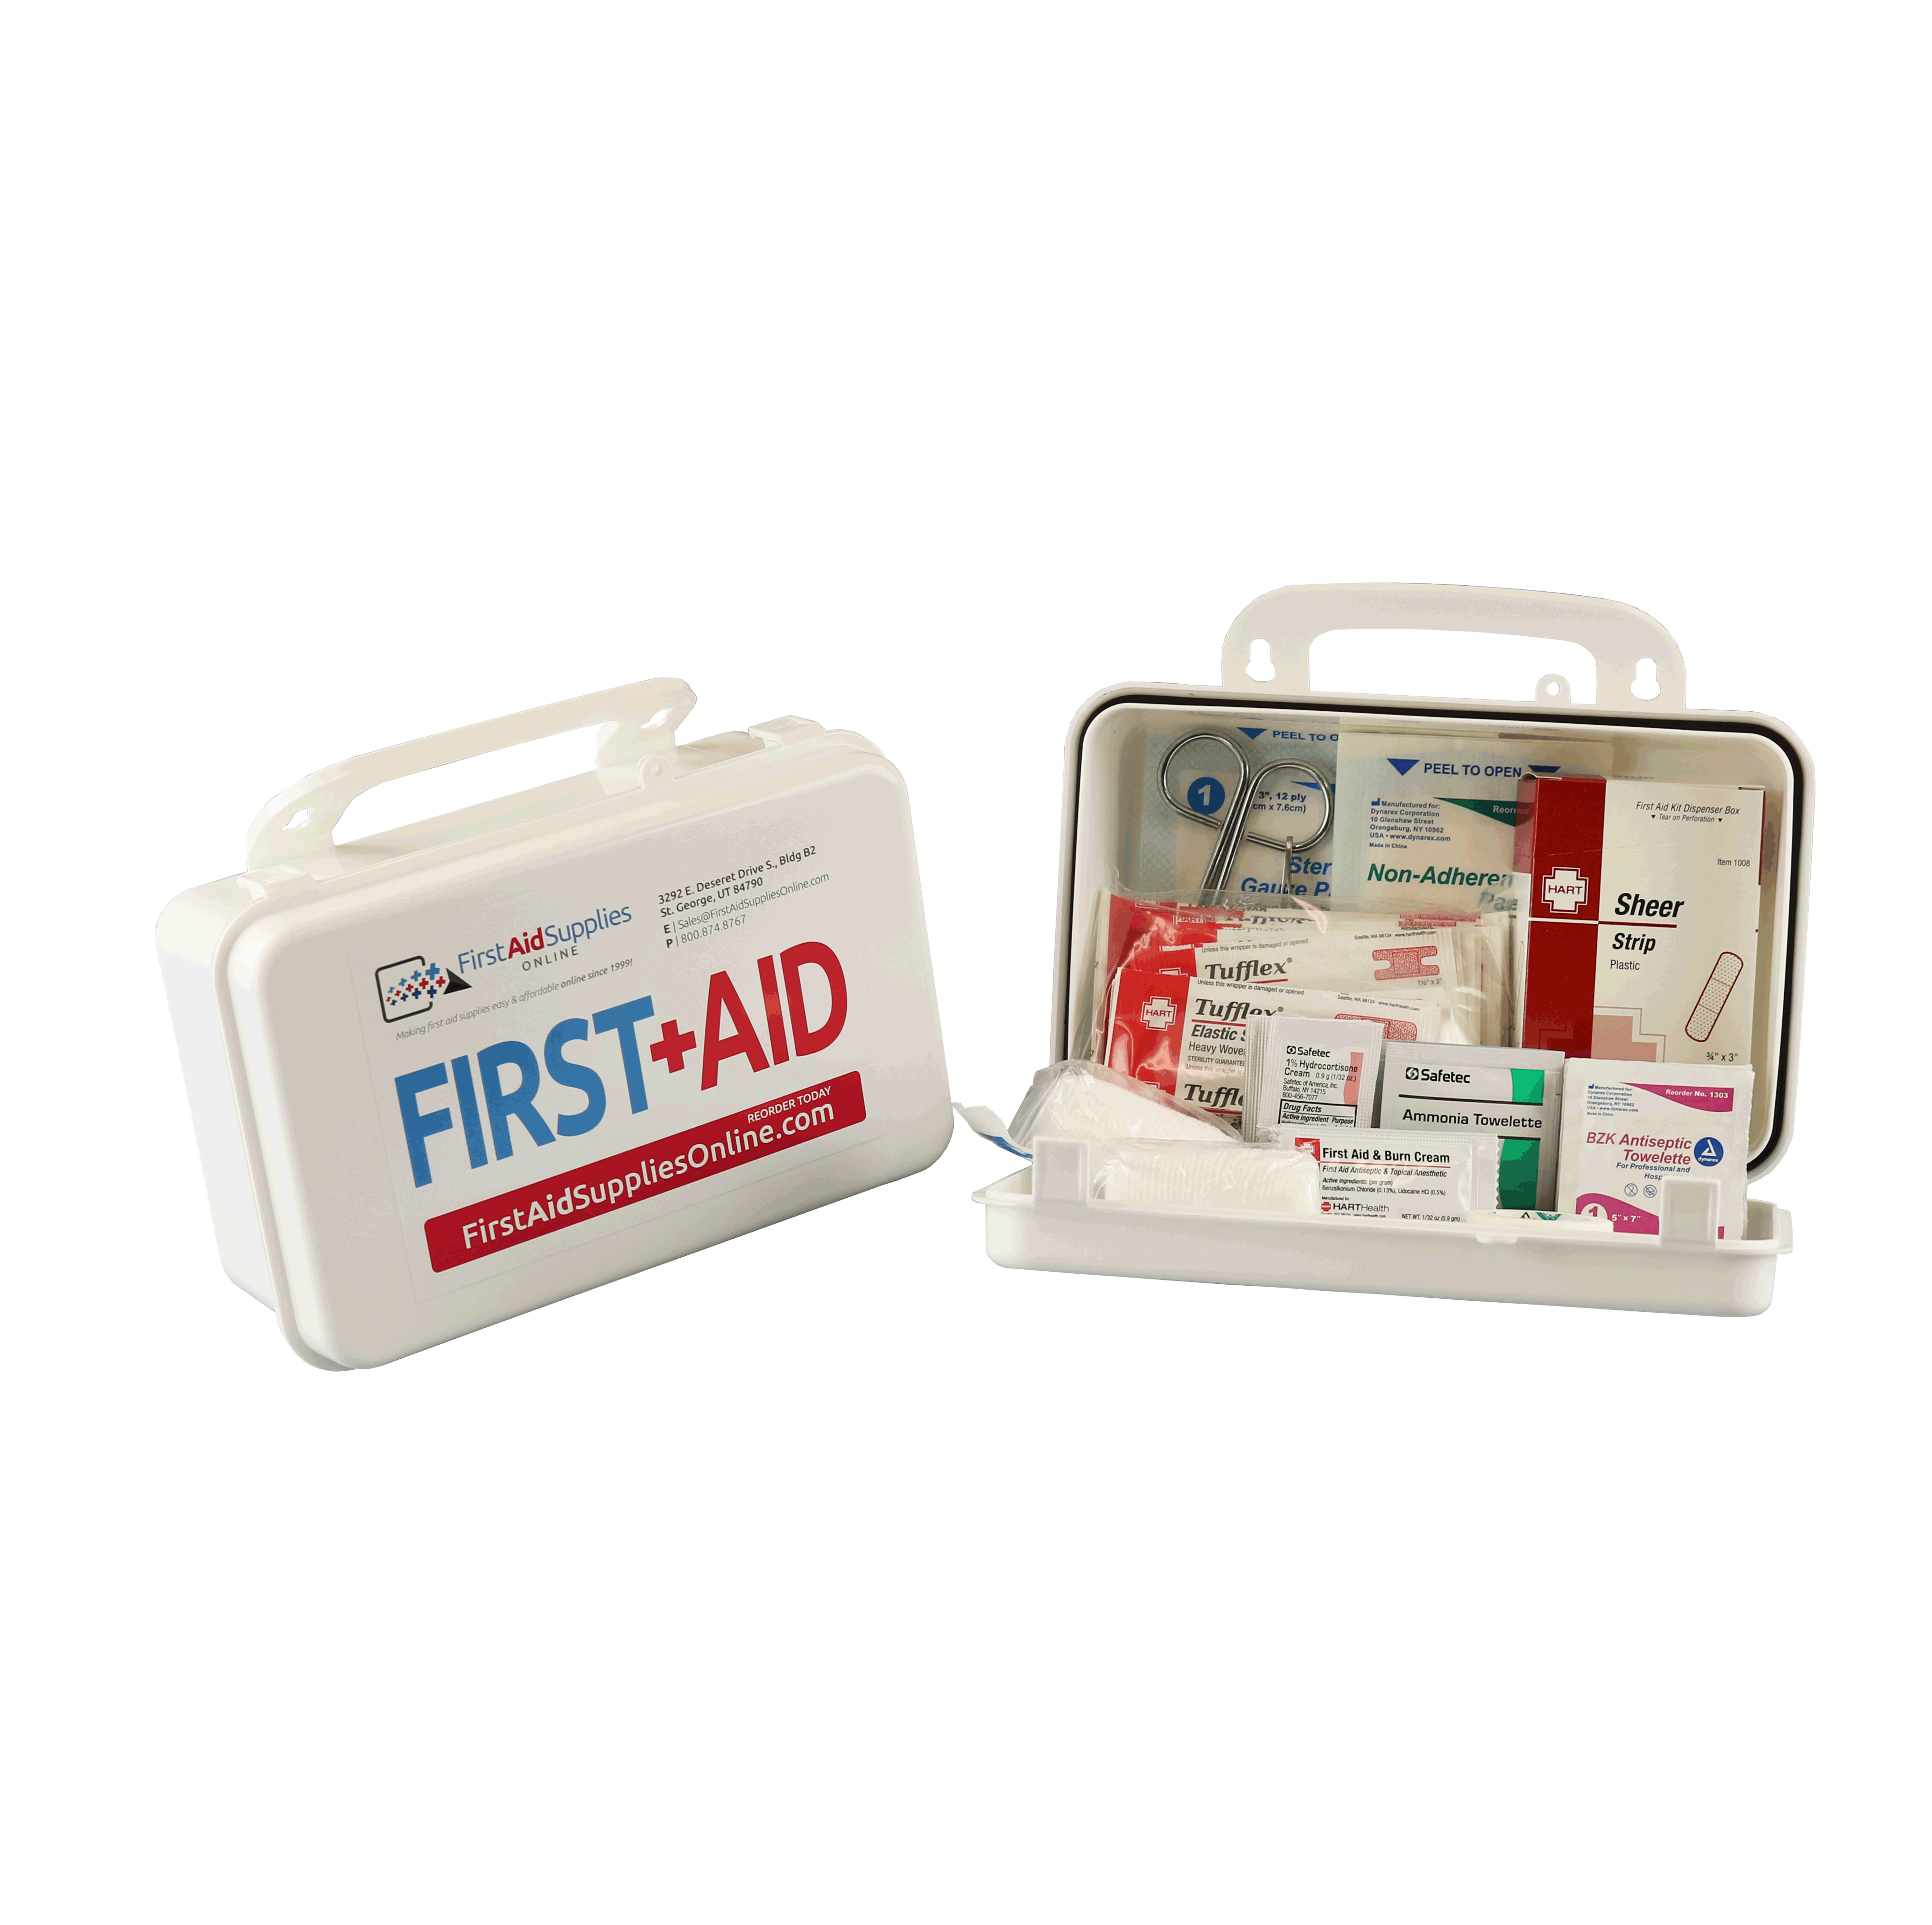 Breakwater Supply First Aid Kit for Car, Home, Office, Travel